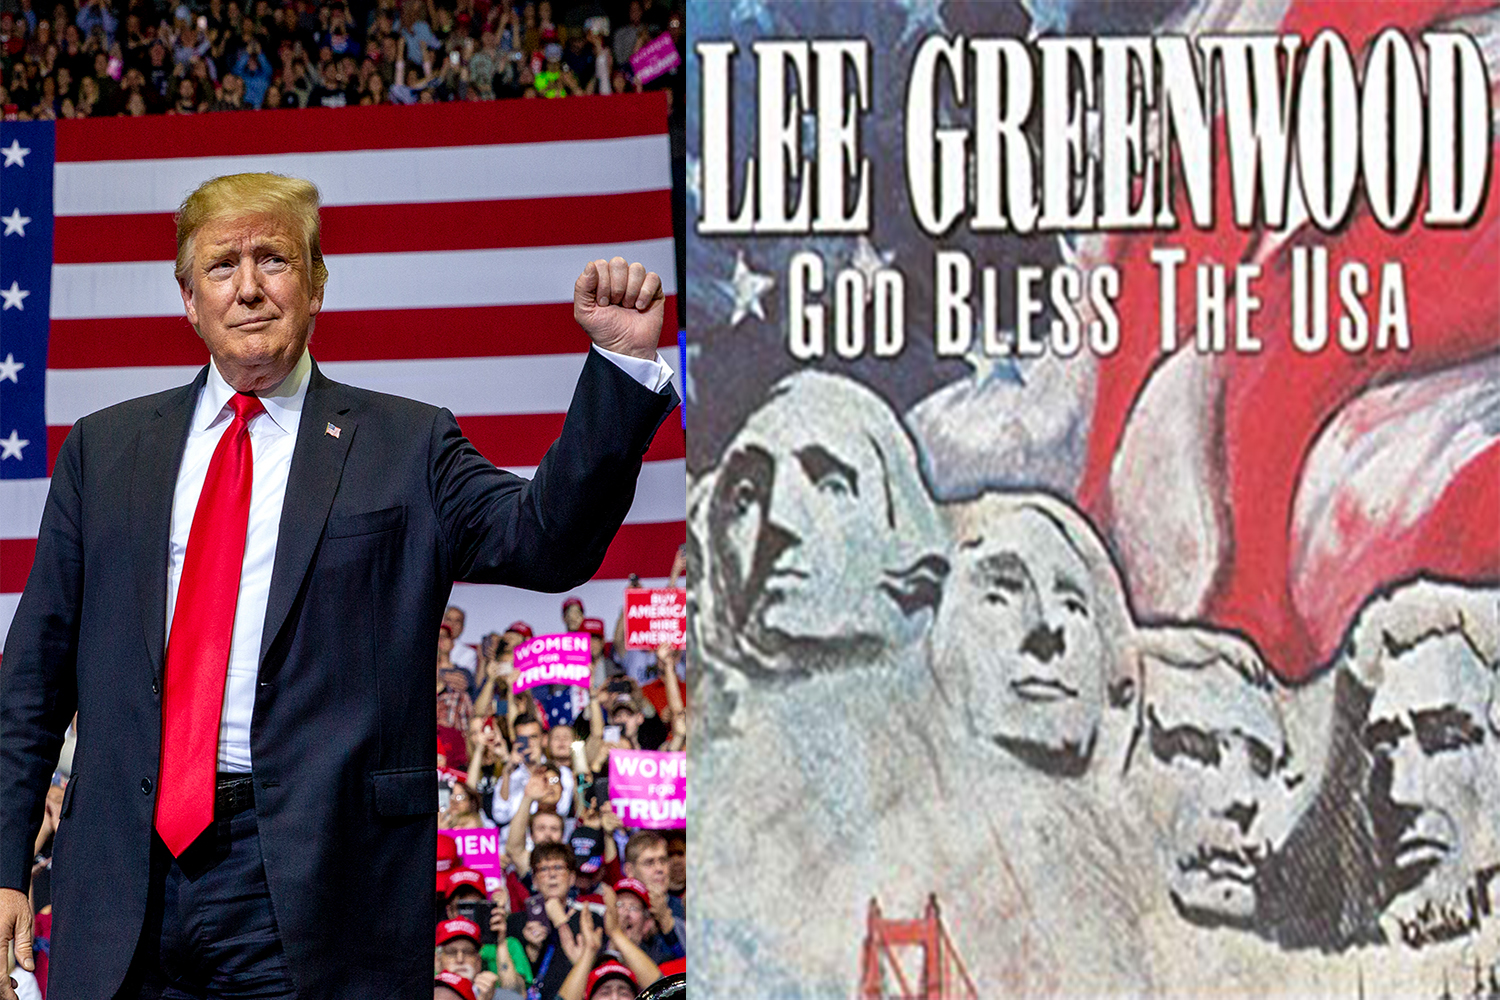 Donald Trump, President: “God Bless the U.S.A.” by Lee Greenwood